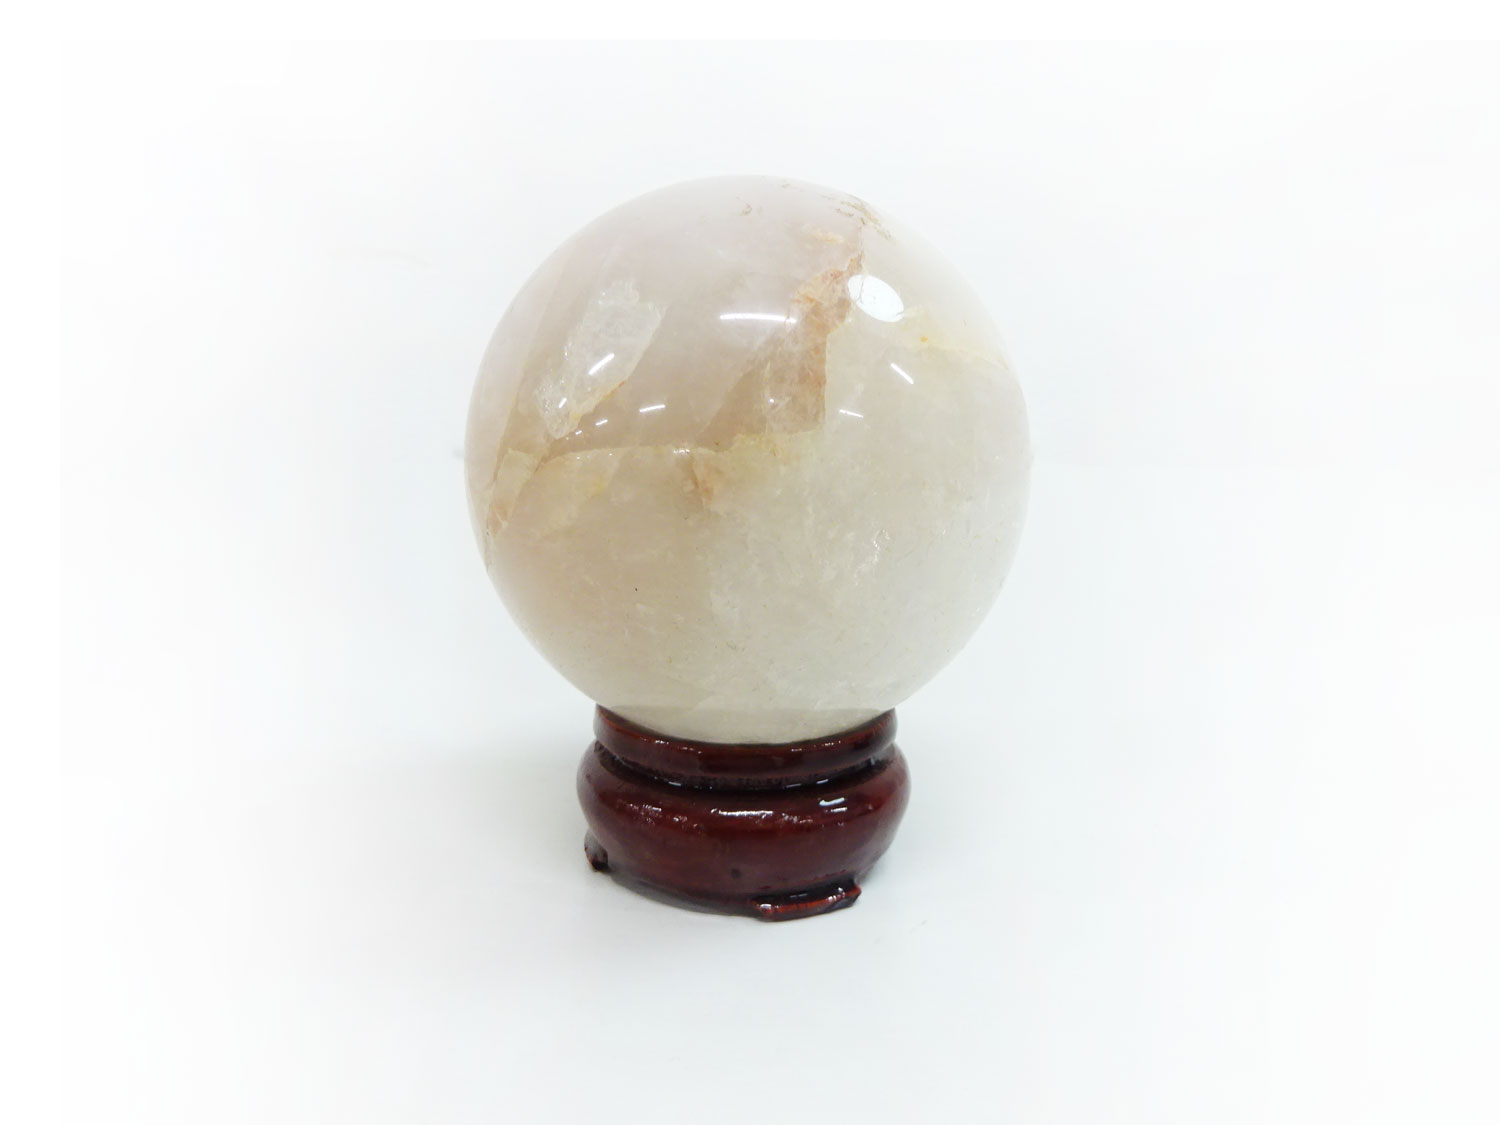 JAPANESE ORNAMENT / NATURAL CRYSTAL & MINERAL (483.27g) / HEALING CRYSTAL SPHERE